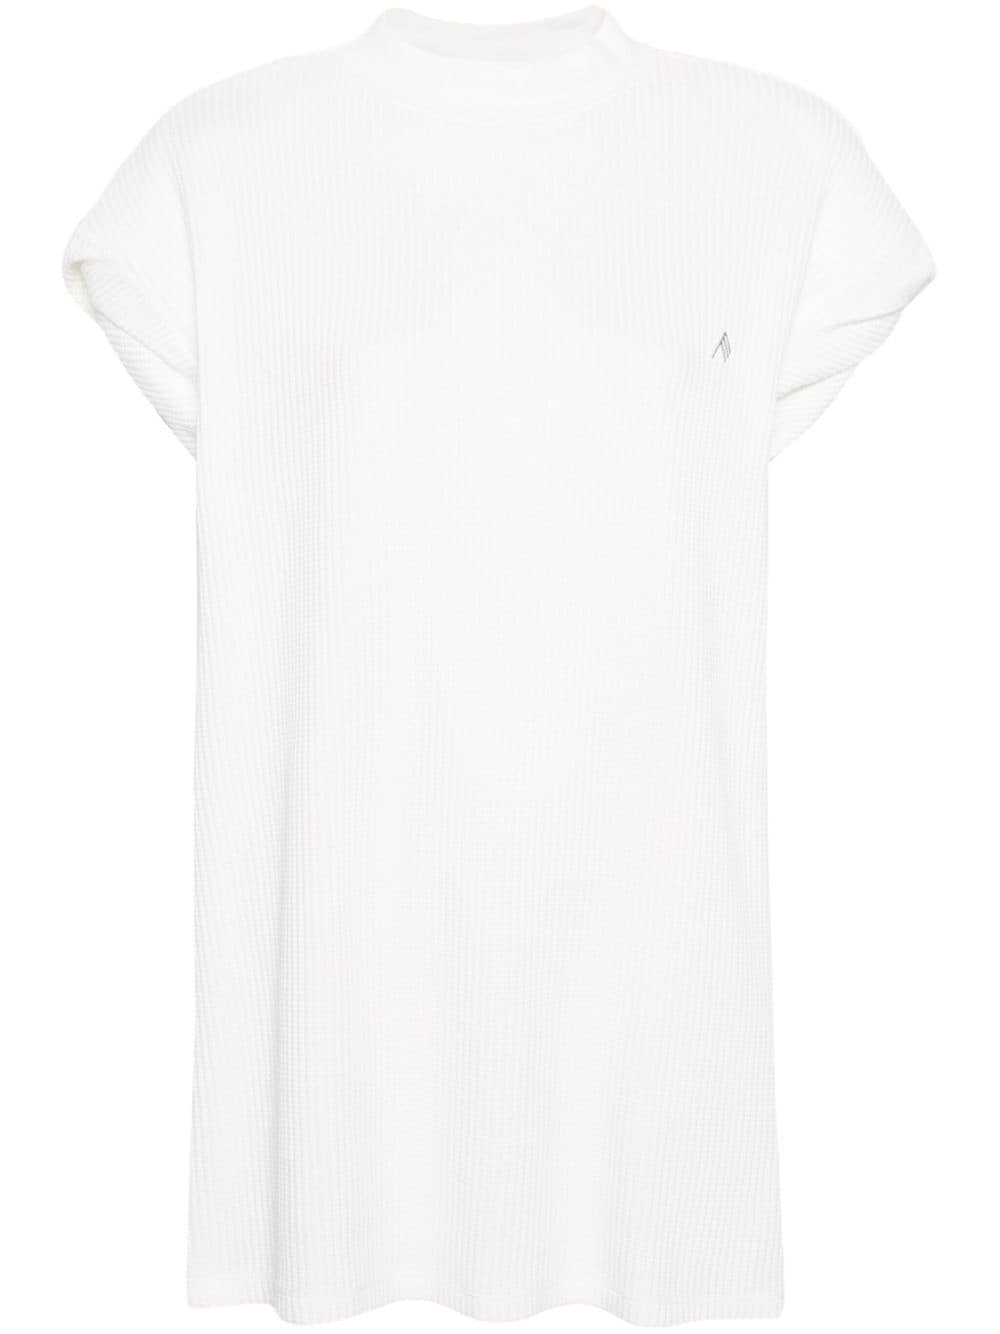 T-shirt with structured shoulder pads